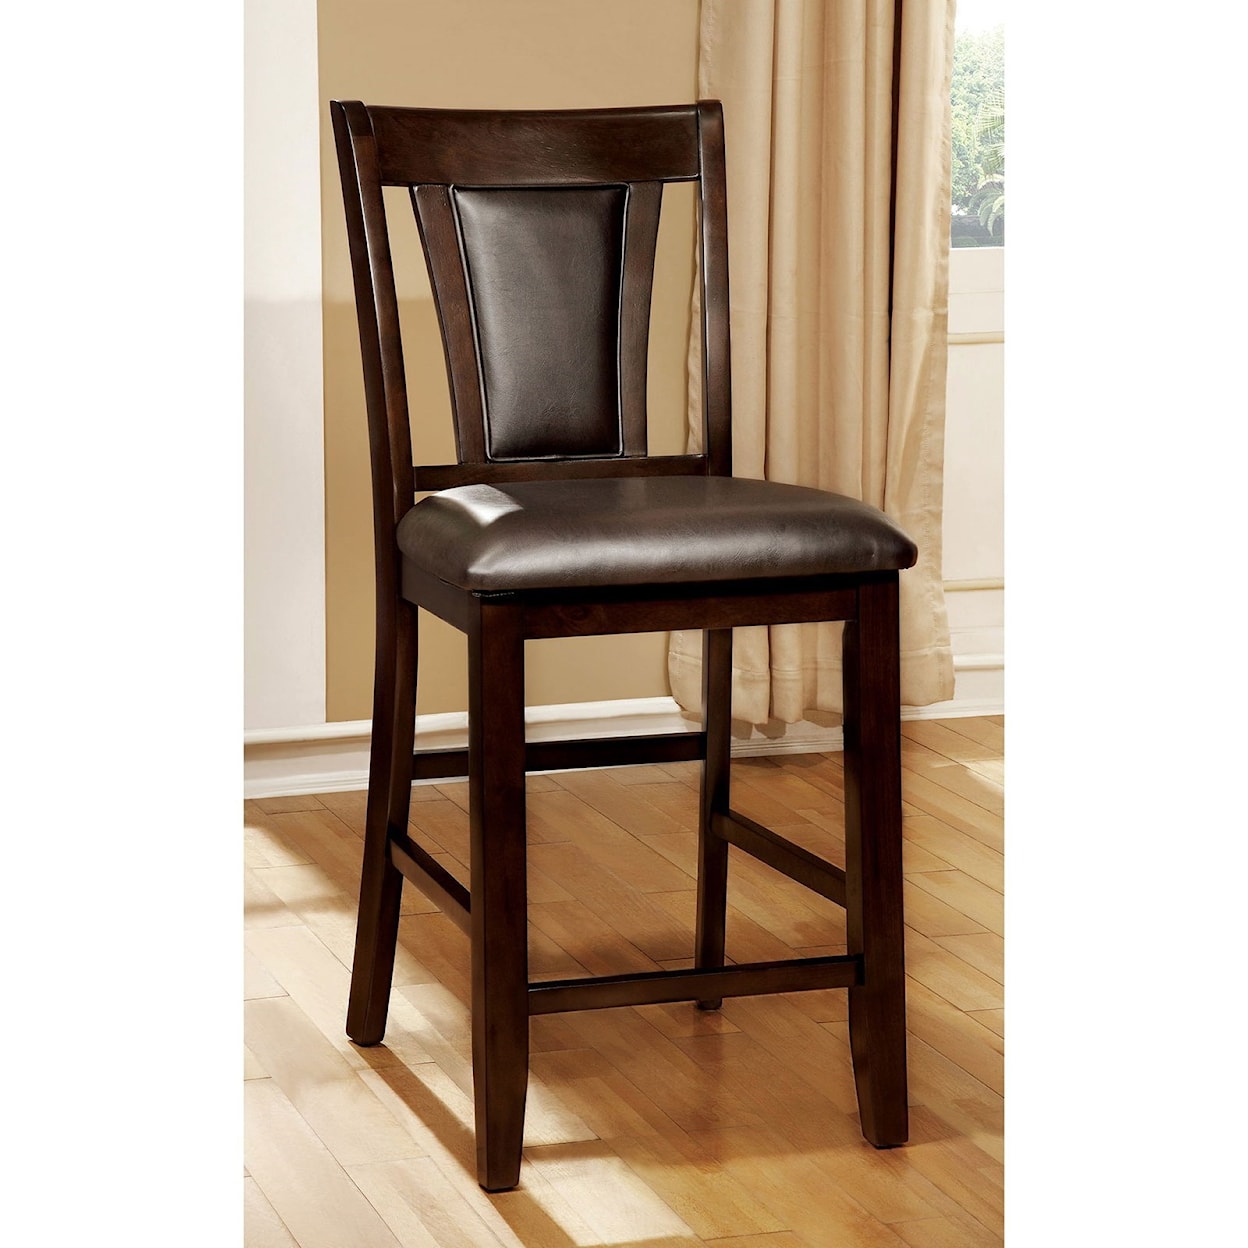 FUSA Brent Counter Height Chair